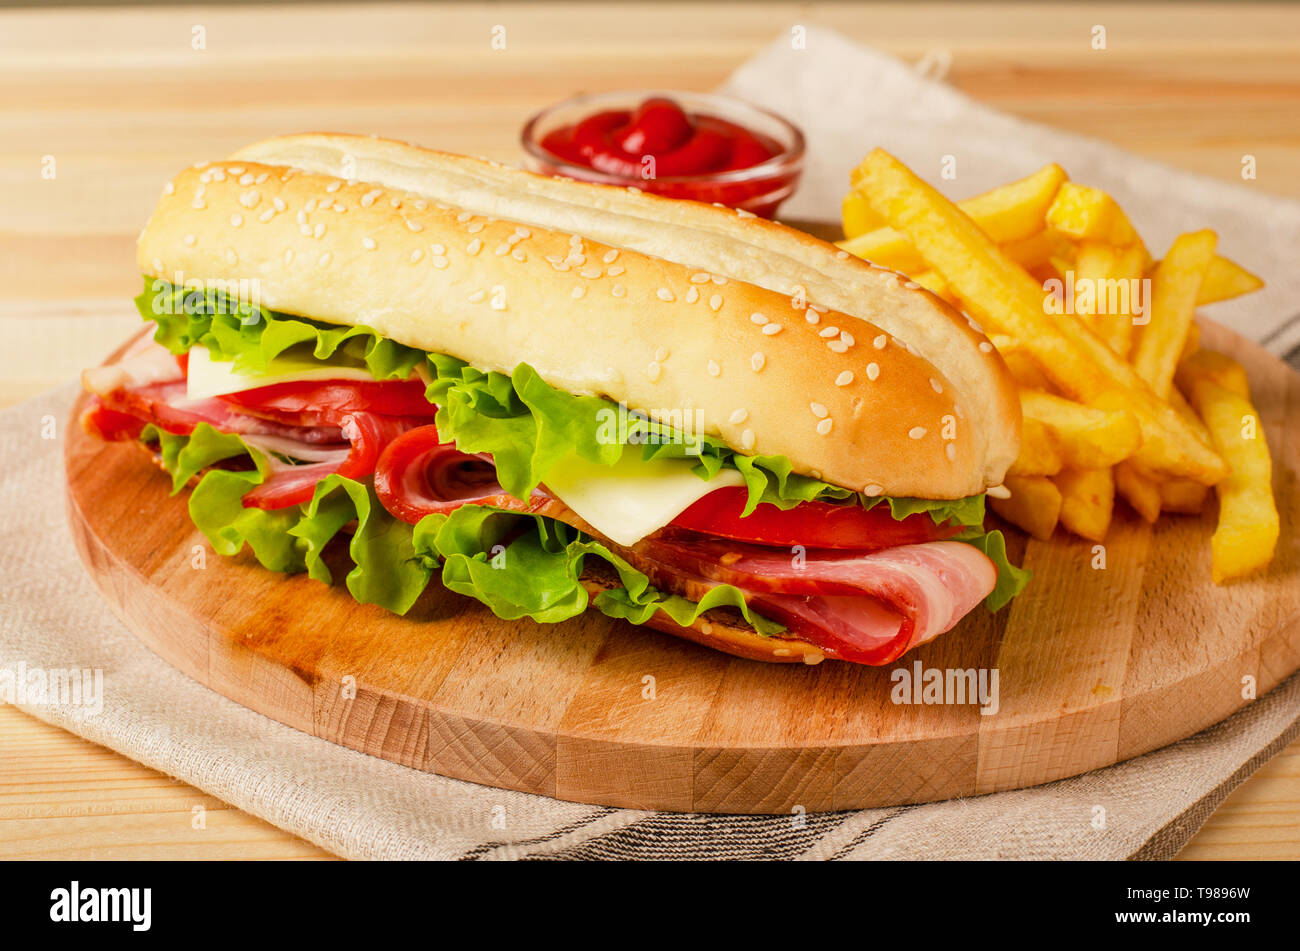 Submarine sandwich with bacon, cheese, tomatoes and lettuce on wooden background Stock Photo